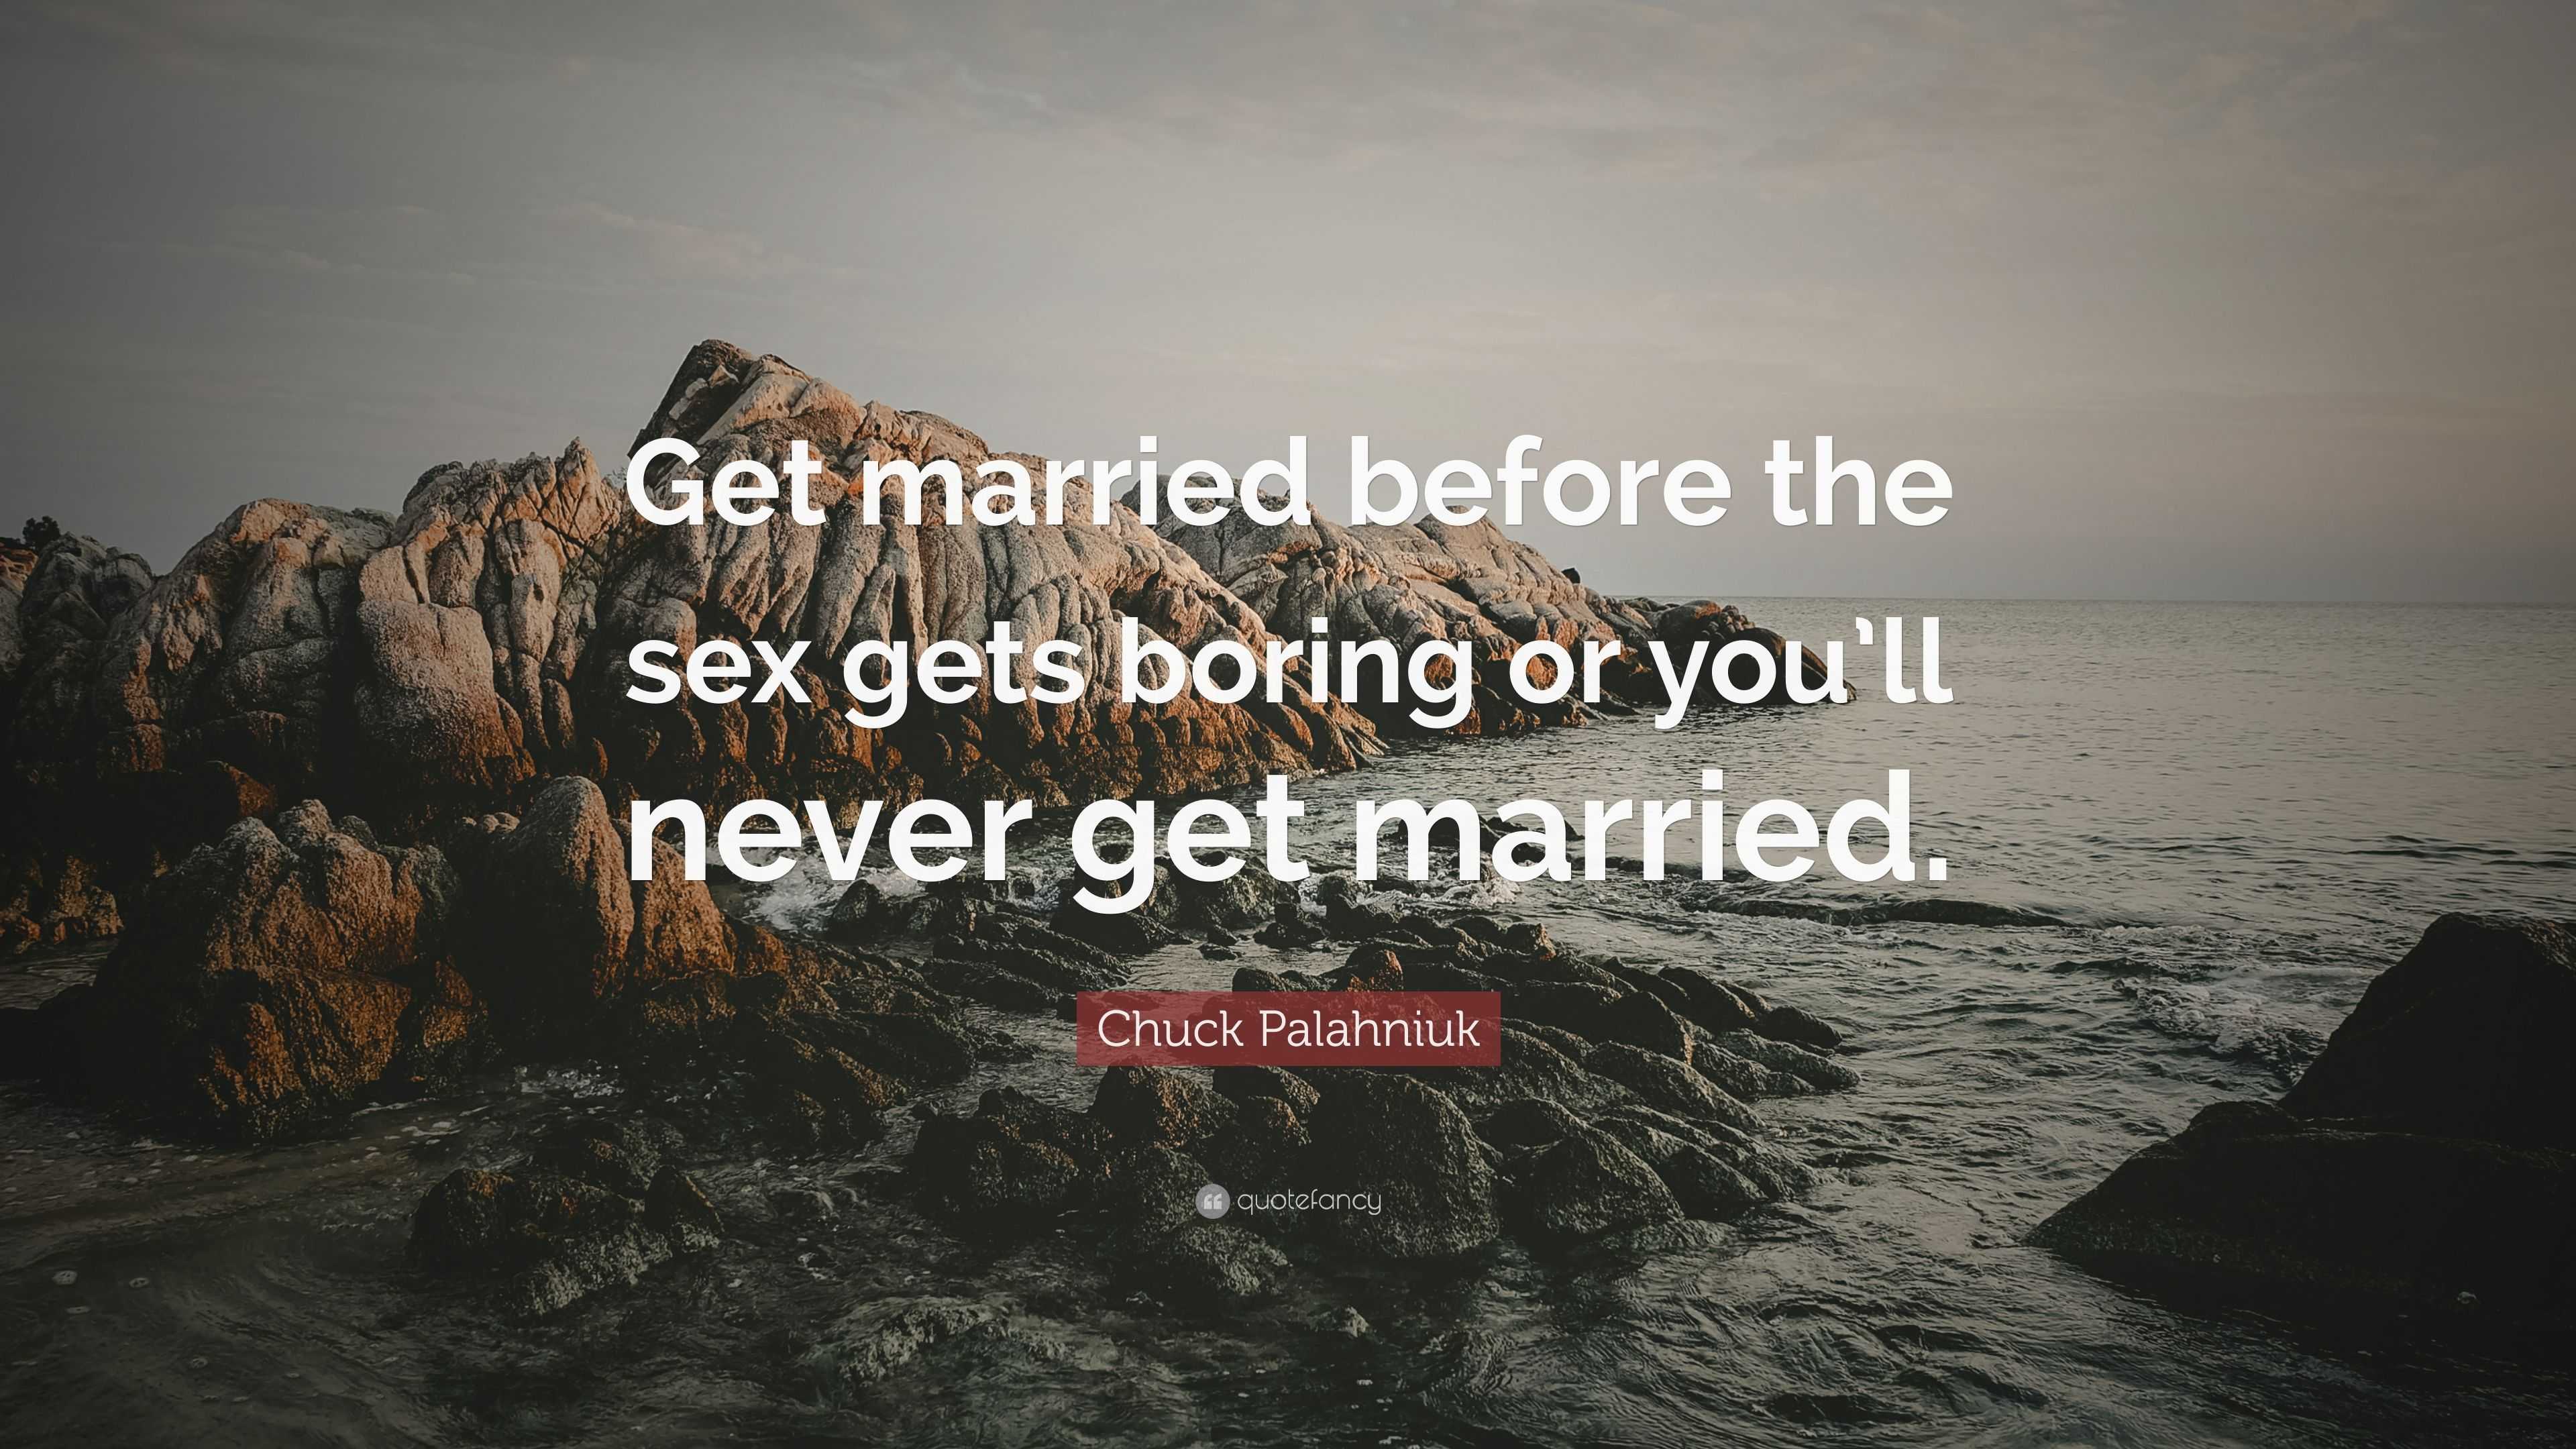 Chuck Palahniuk Quote “Get married before the sex gets boring or youll never get married.” image image